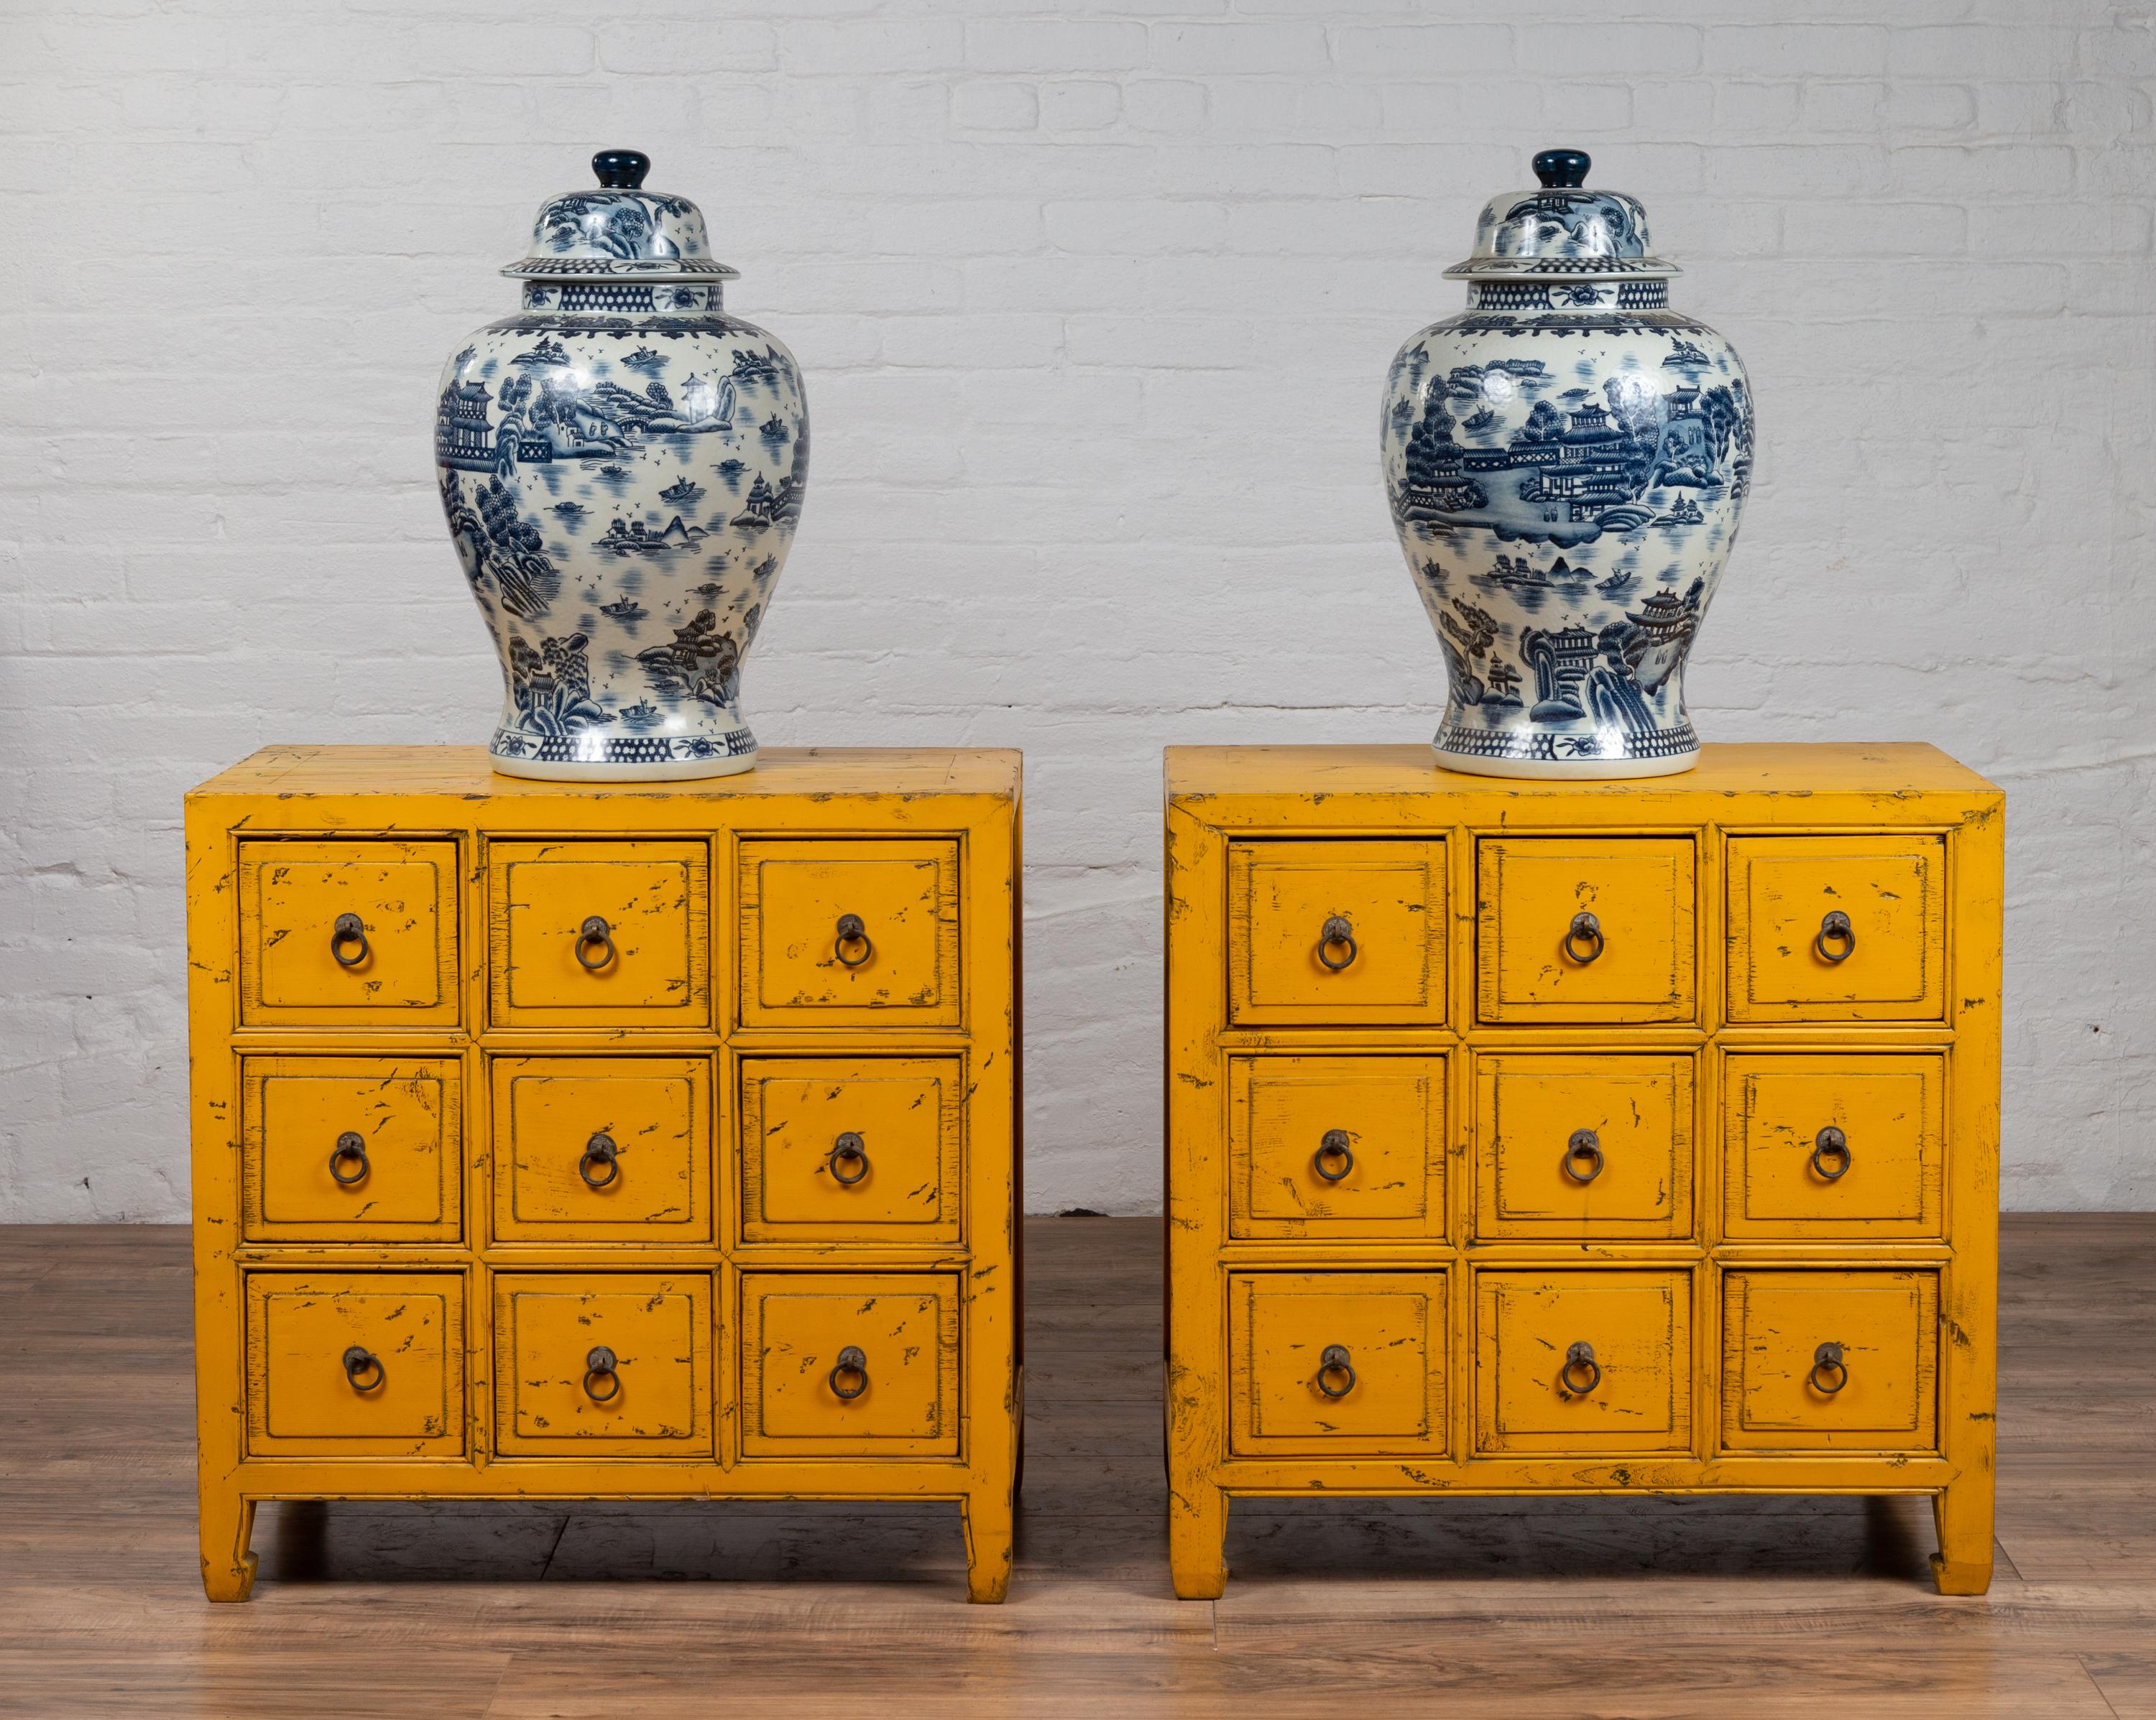 A pair of vintage Chinese yellow painted nine-drawer apothecary bedside chests from the mid-20th century, with distressed finish and black splatter. Born in China during the mid-century period, each of this charming pair of apothecary chests